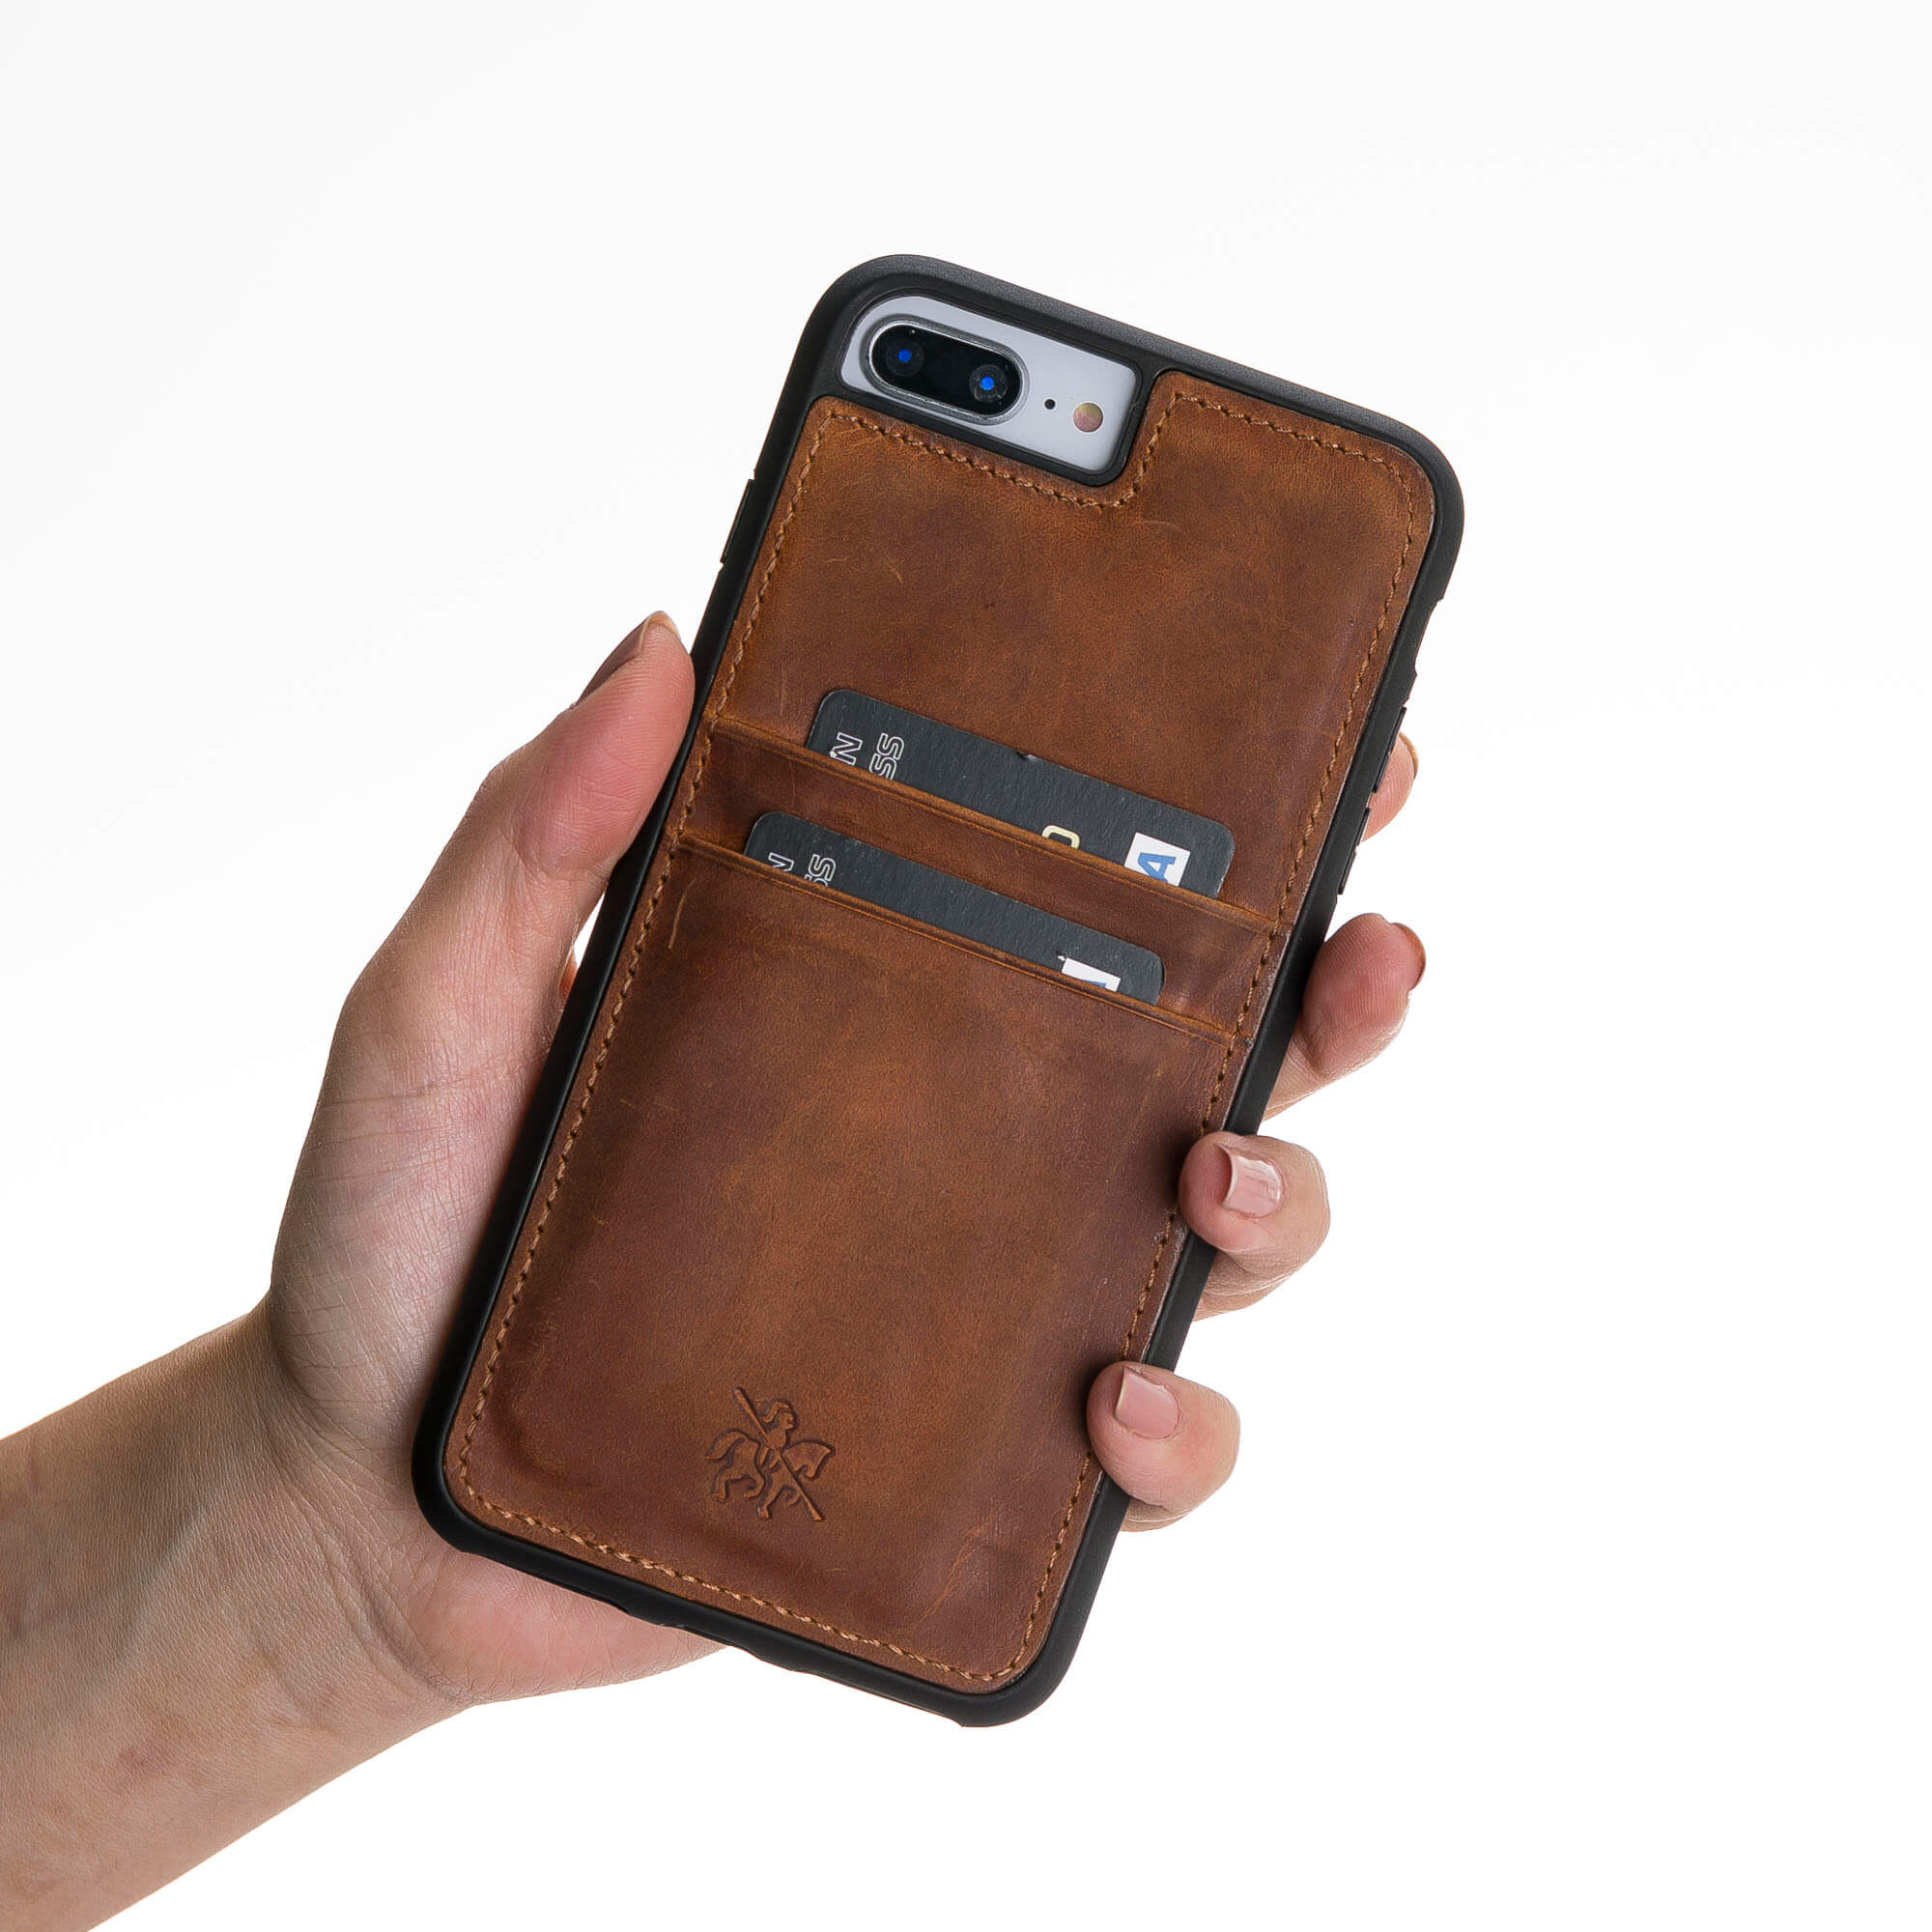 baseren groentje kiespijn Capri iPhone 7 Plus Leather Snap-On Case with Cardholder - Venito - Venito  Leather